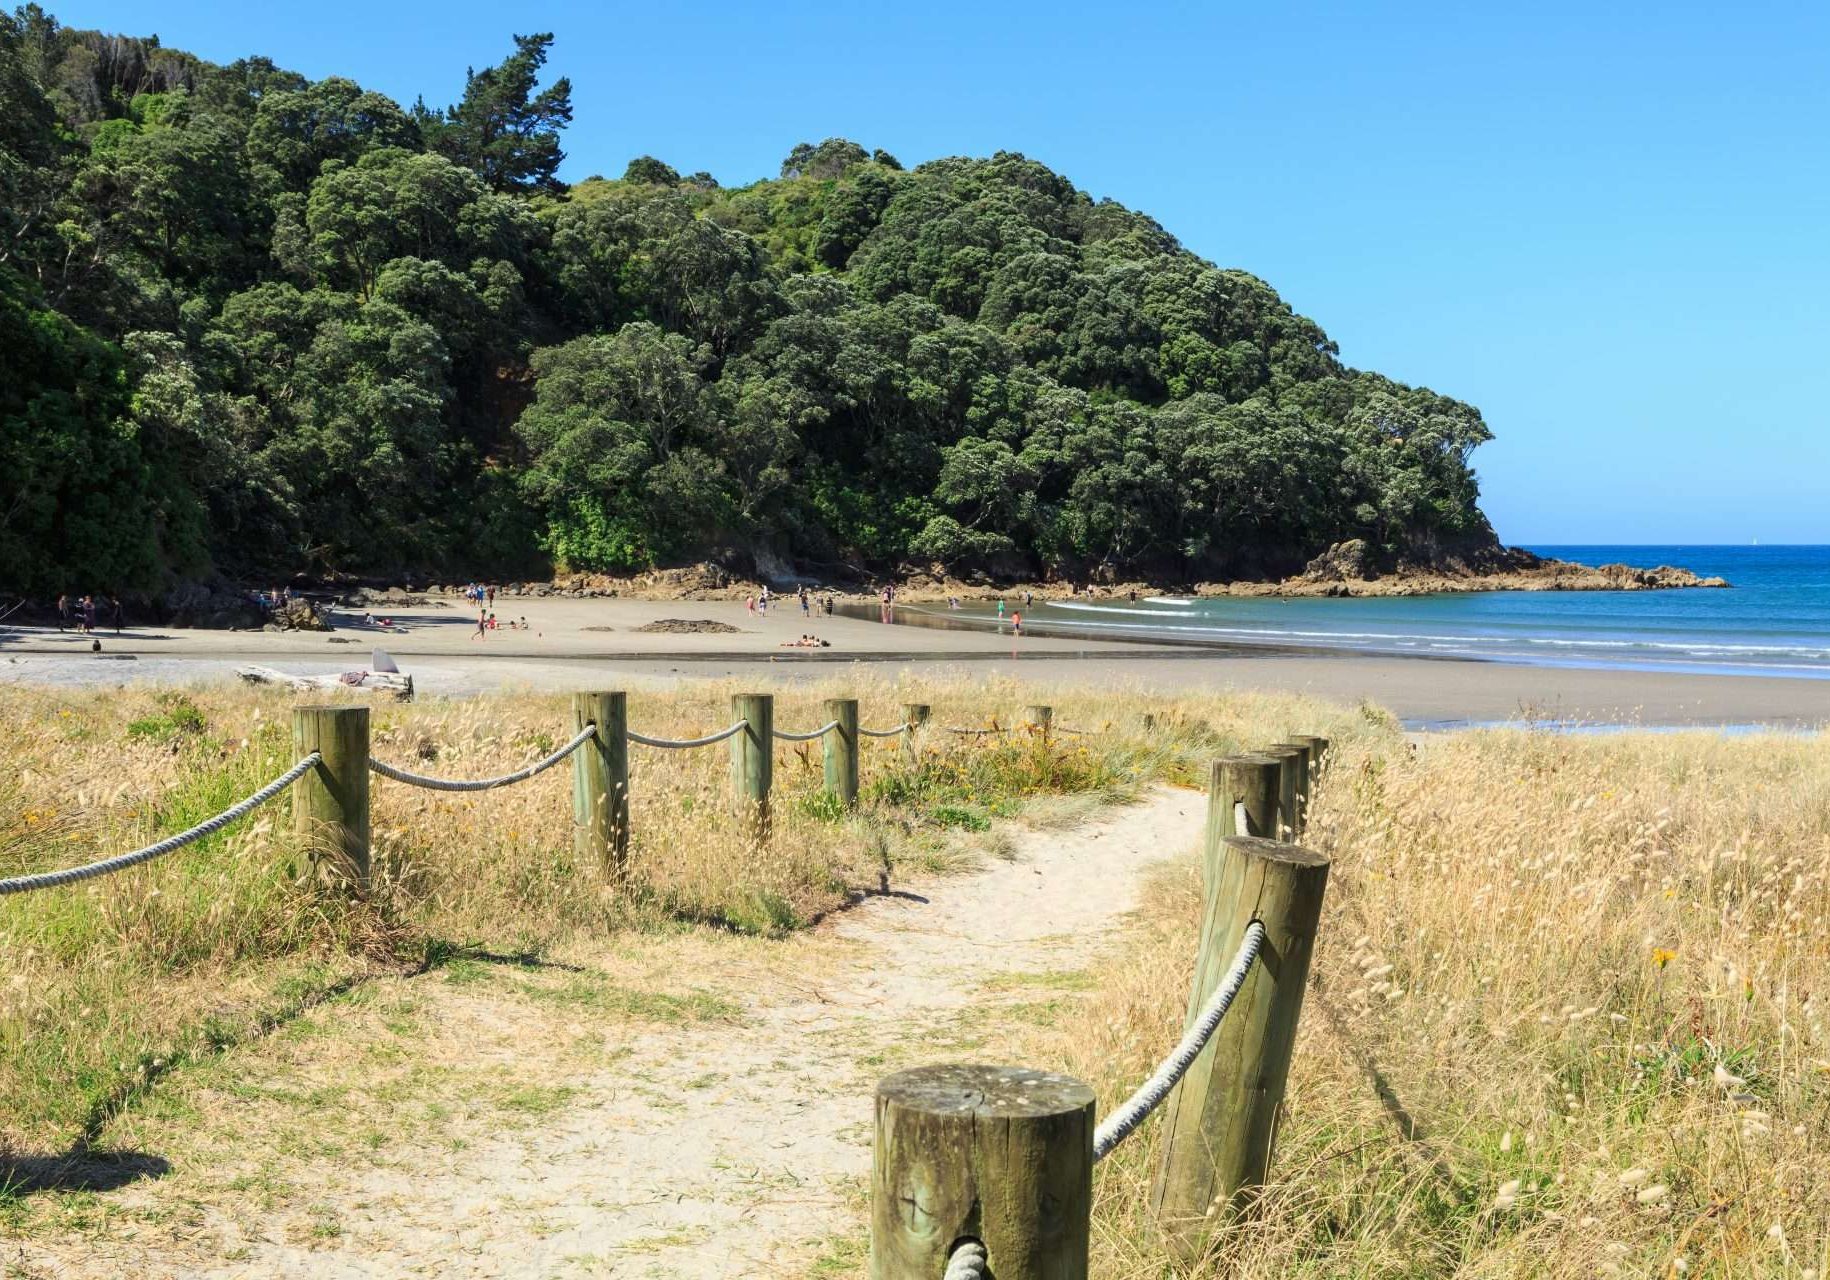 Pathway down to a New Zealand beach in summer. Photographed at Waihi Beach, NZ